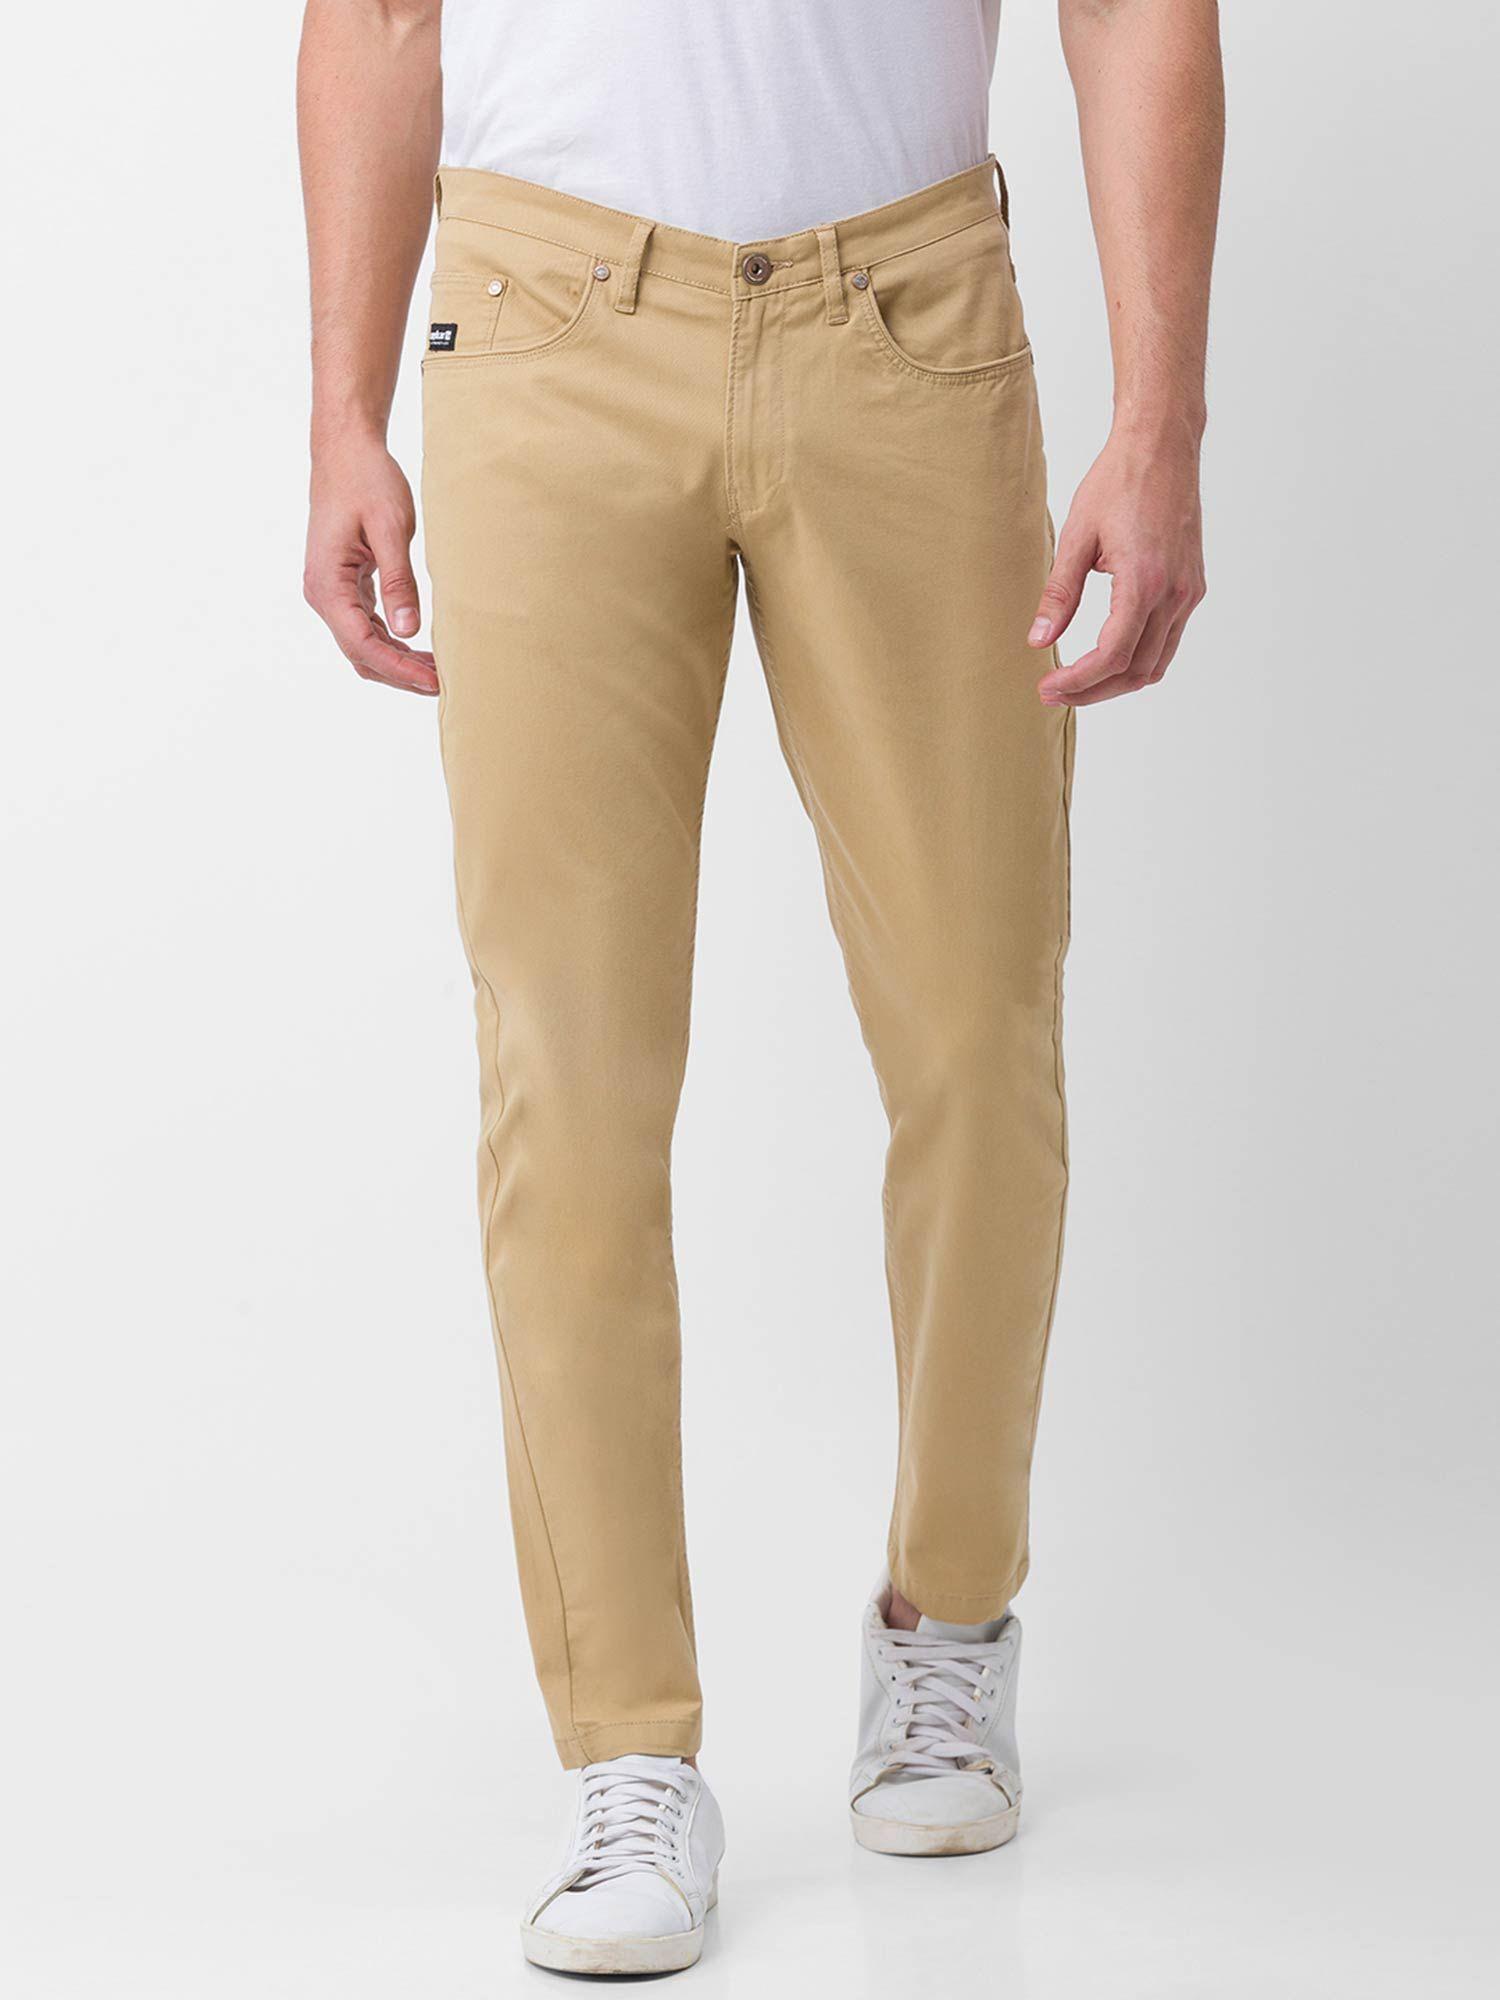 sand khaki cotton slim fit tapered length trousers for men